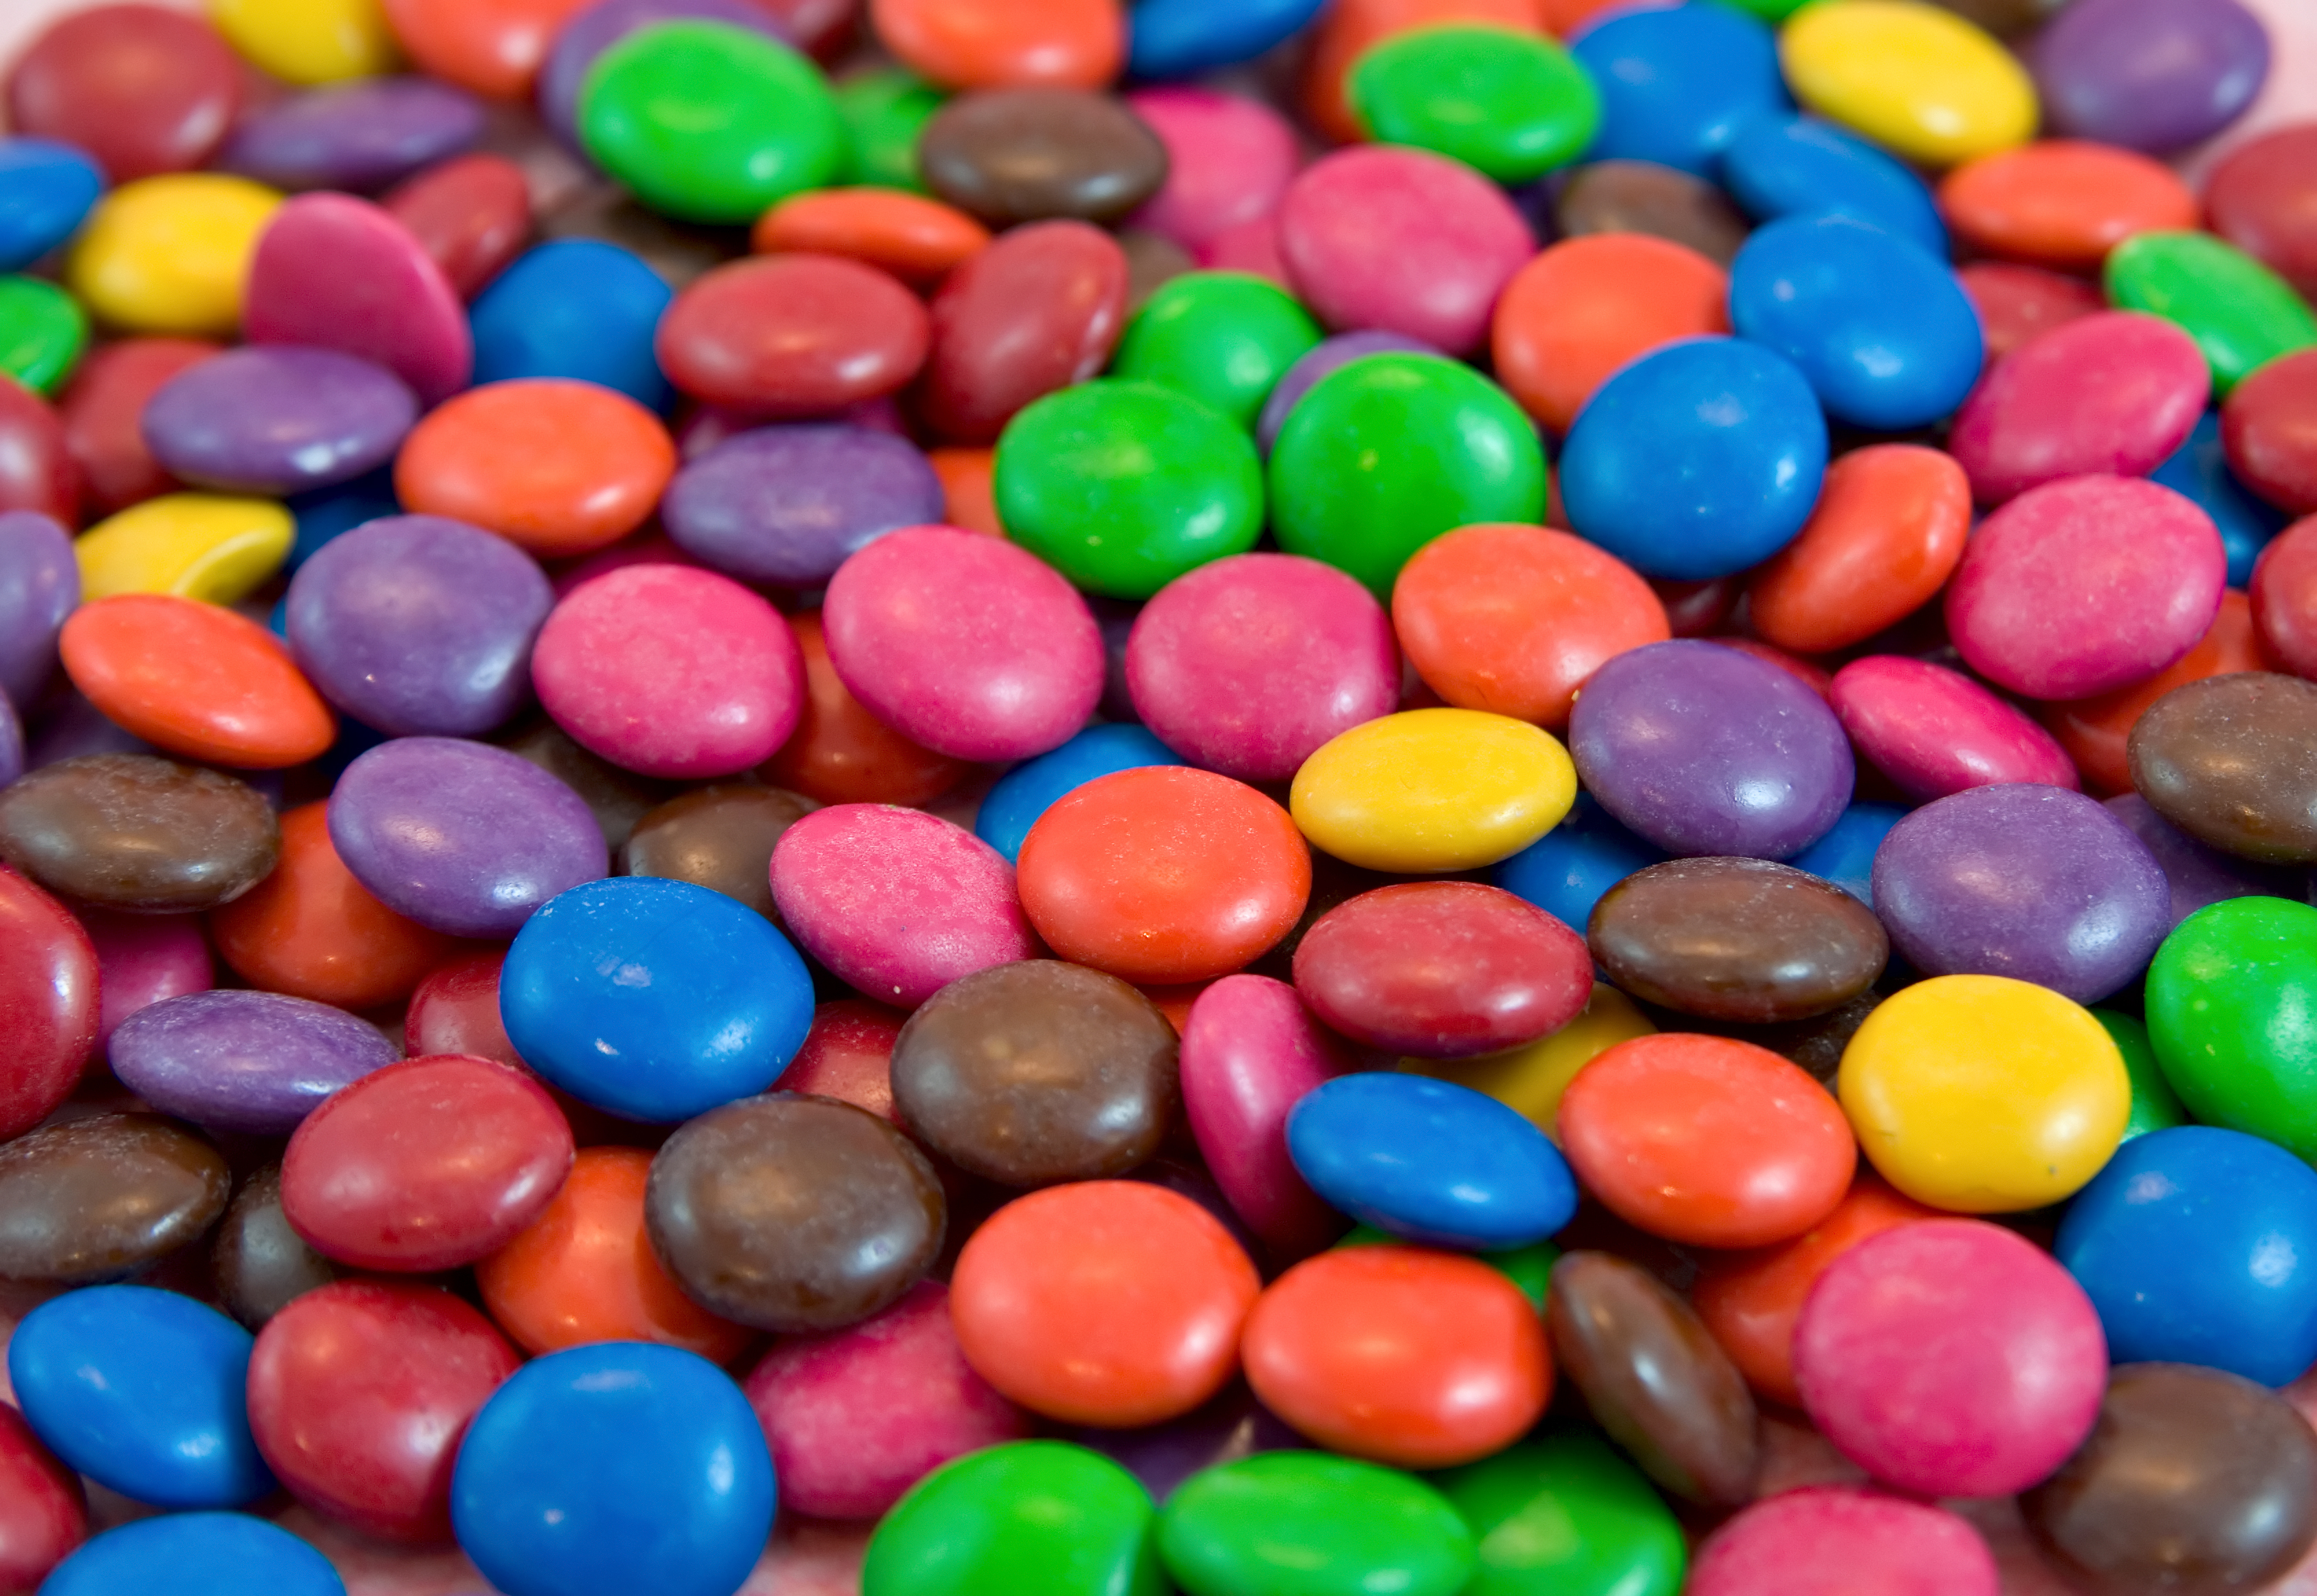 A close-up view of various colorful chocolate candies with candy shells